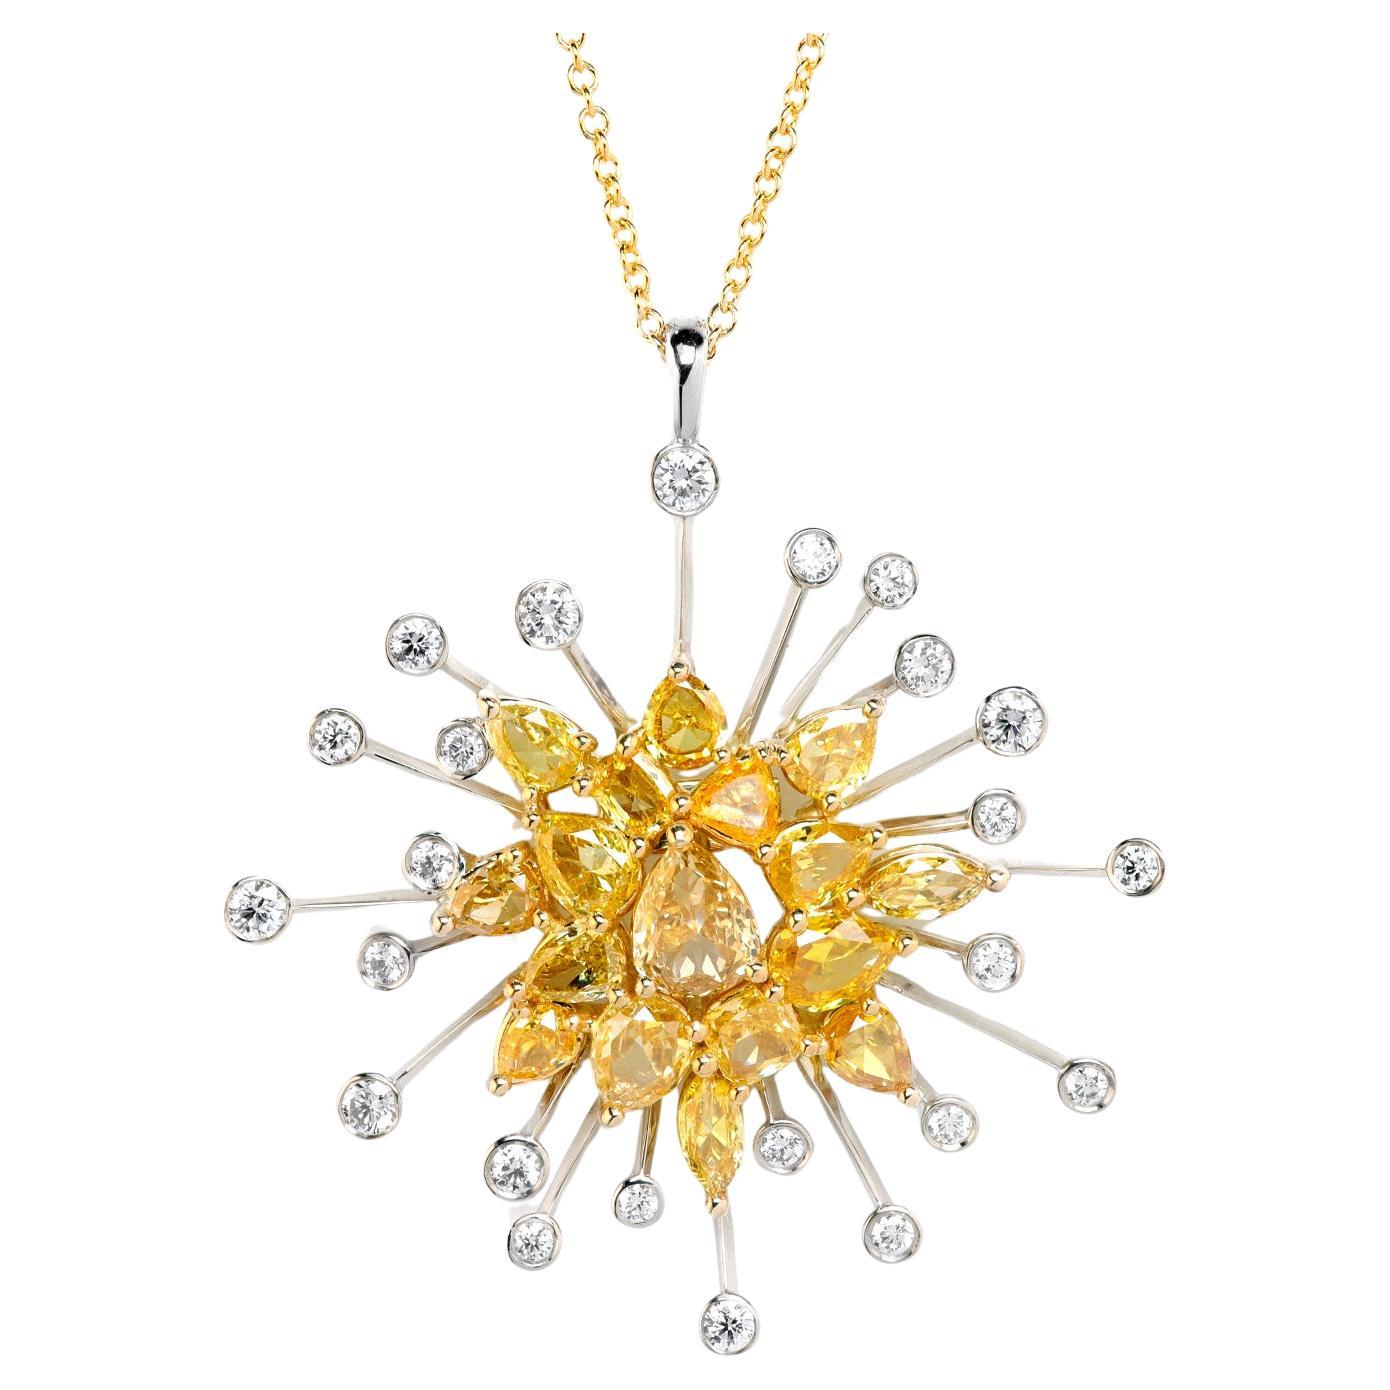 Leon Mege "Dream of Infinity" gold pendant with yellow and white diamonds. For Sale